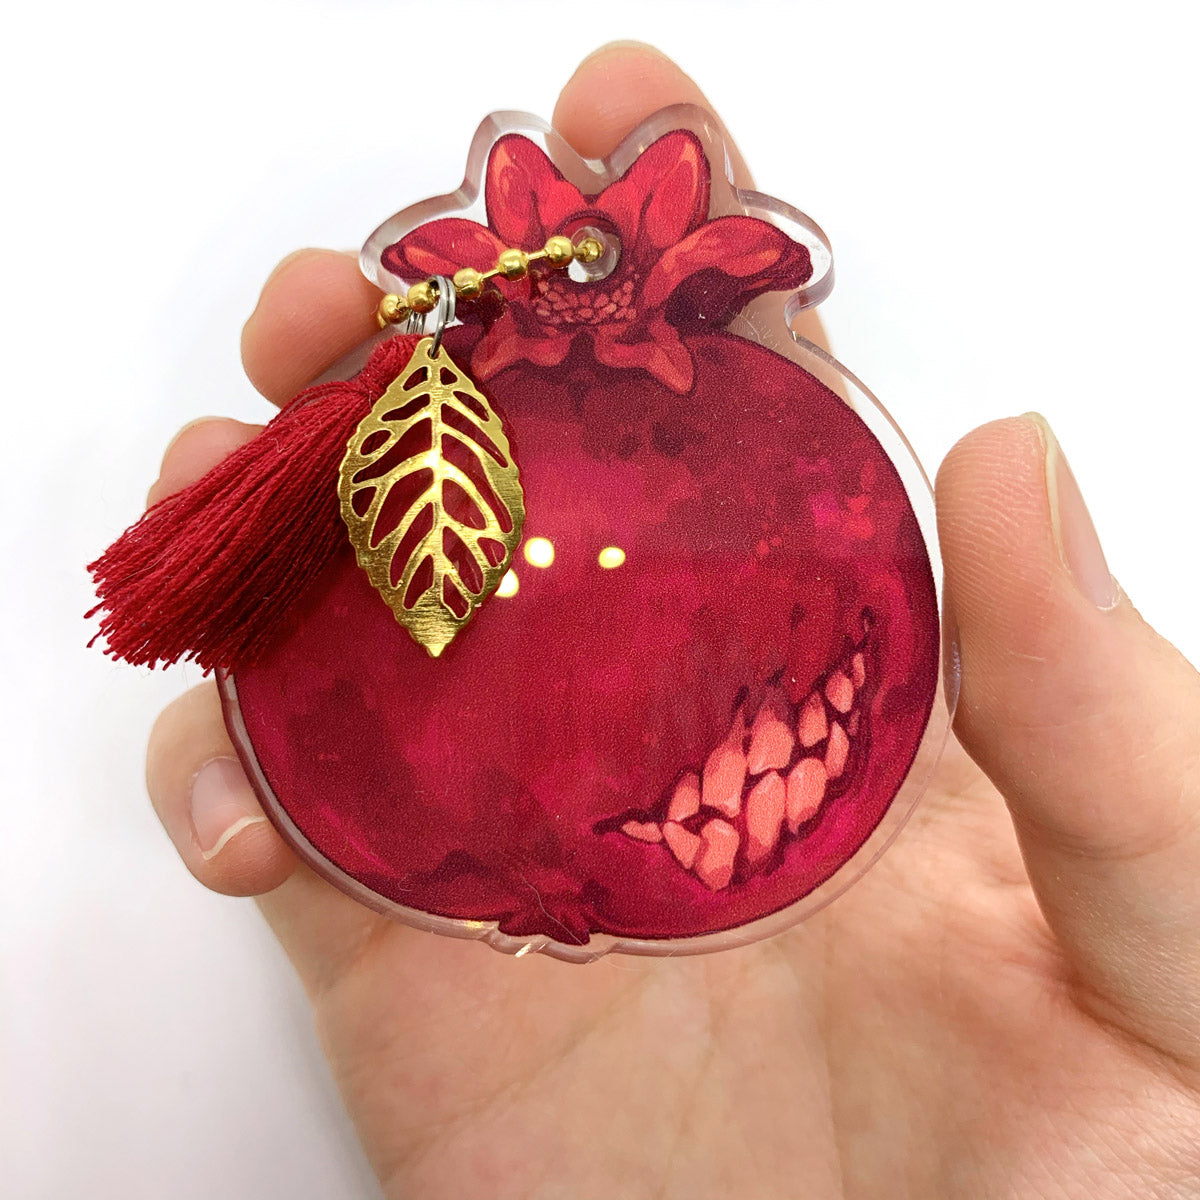 The backside of a transparent acrylic pomegranate charm with shakeable teeth inside, decorated with a gold beaded chain, a gold leaf, and a red tassel.